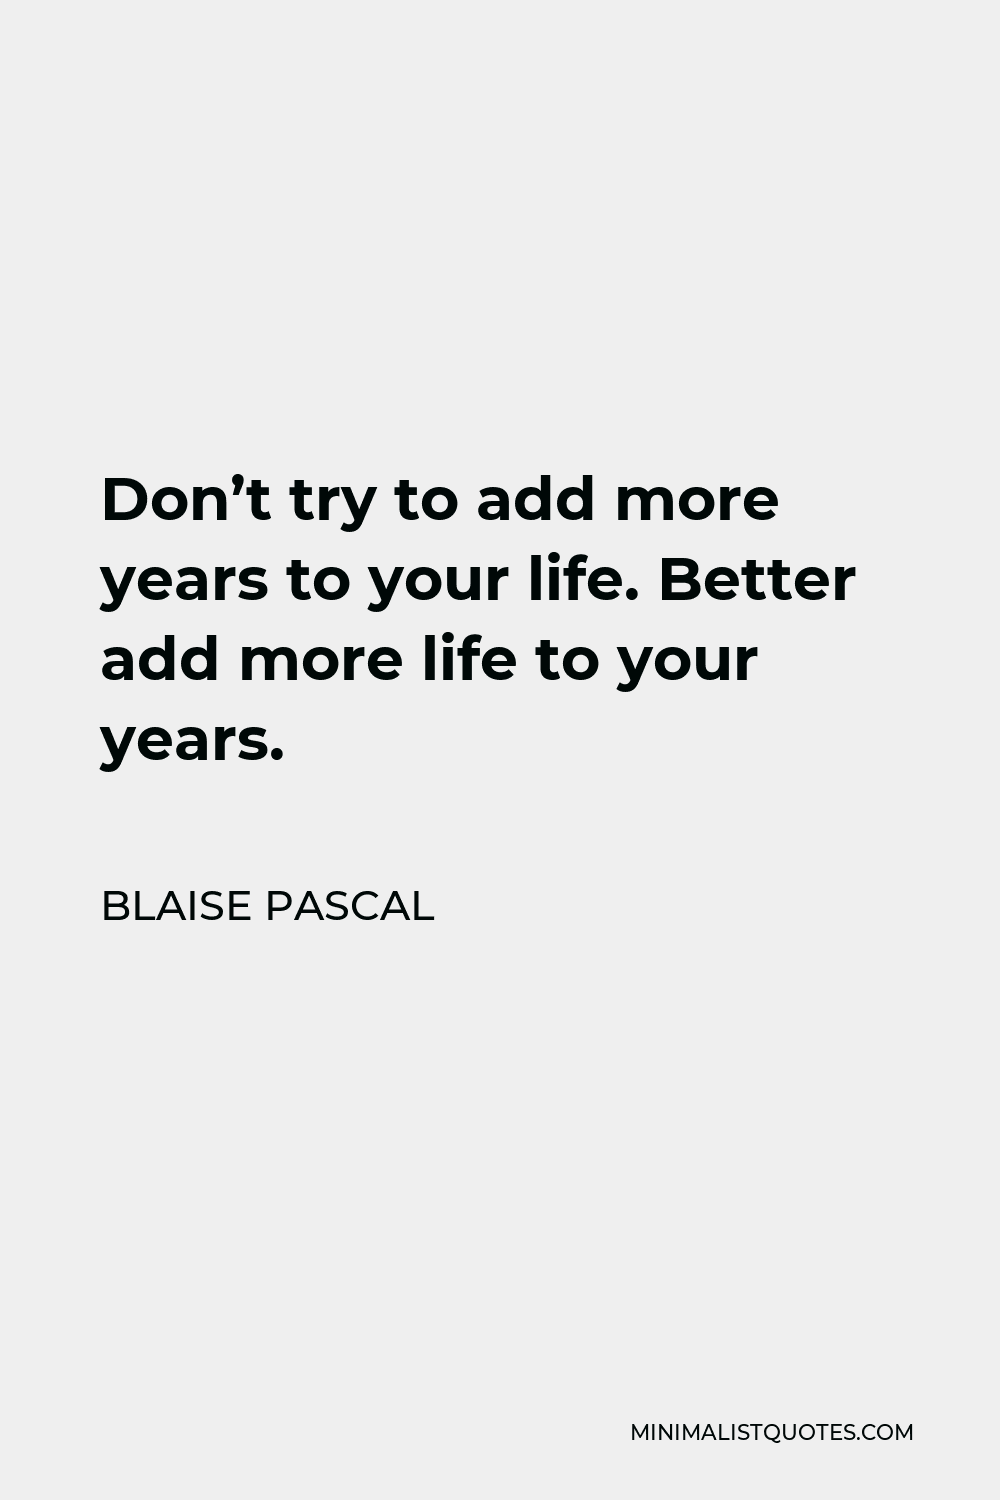 Blaise Pascal Quote - Don’t try to add more years to your life. Better add more life to your years.